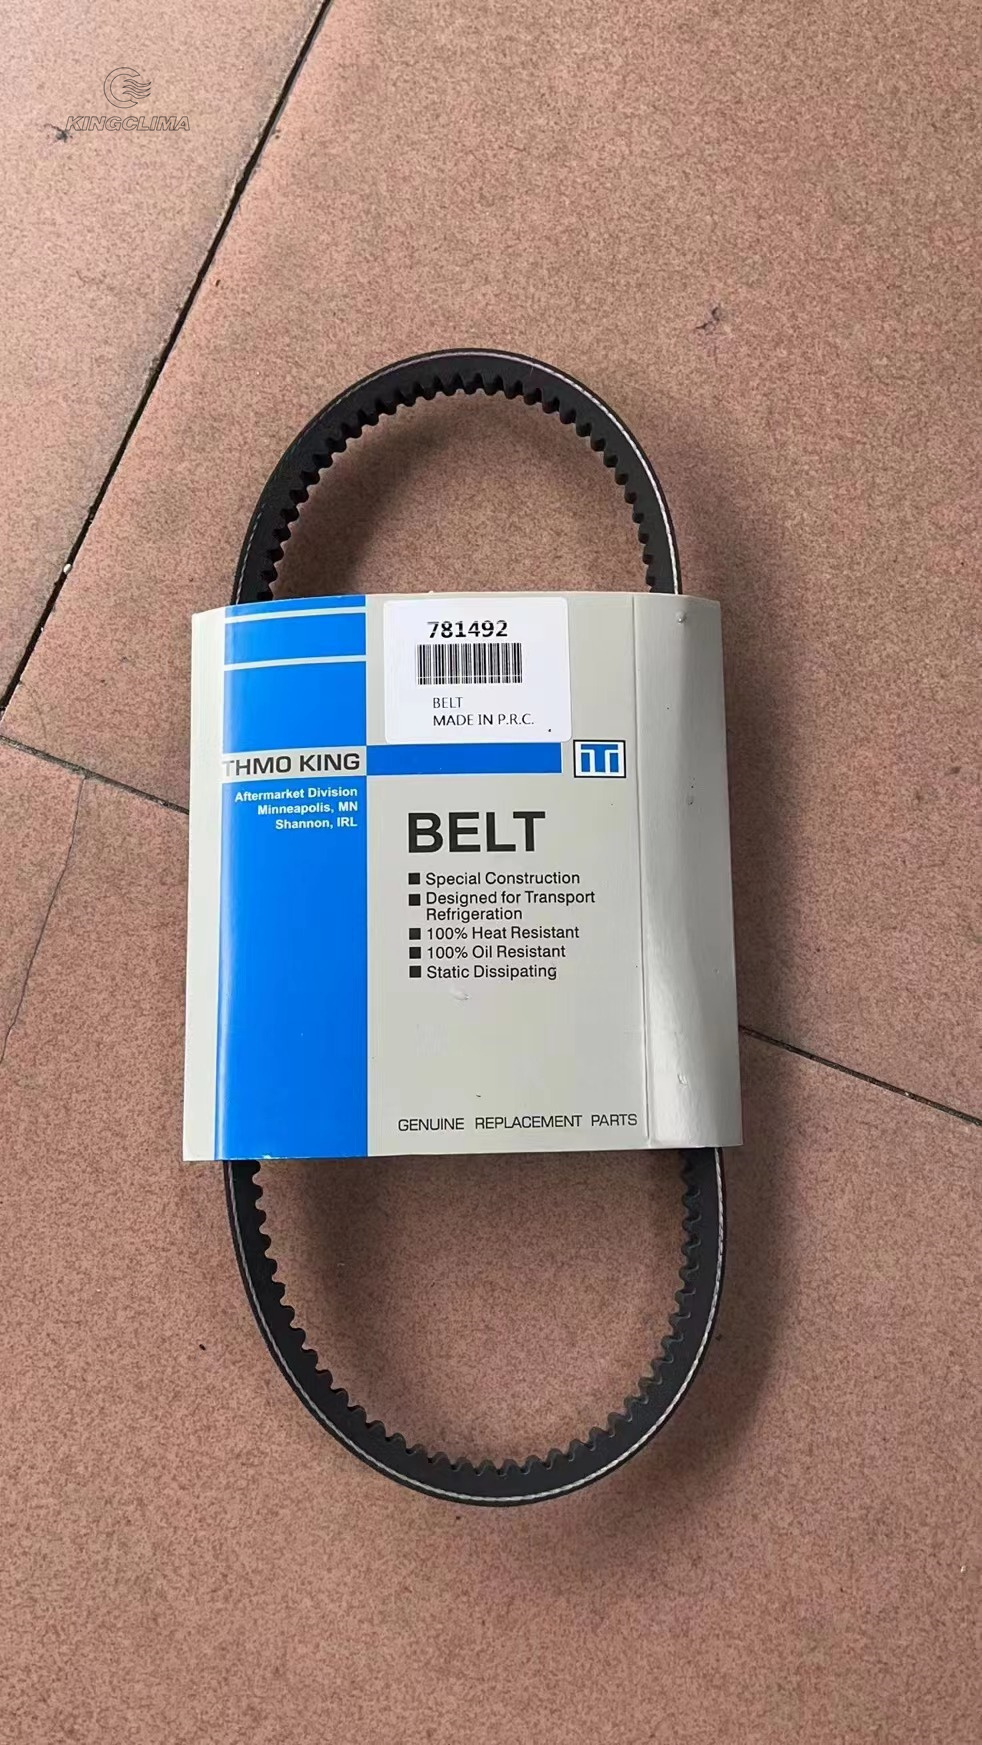 78-1492 thermo king belts for refrigeration units